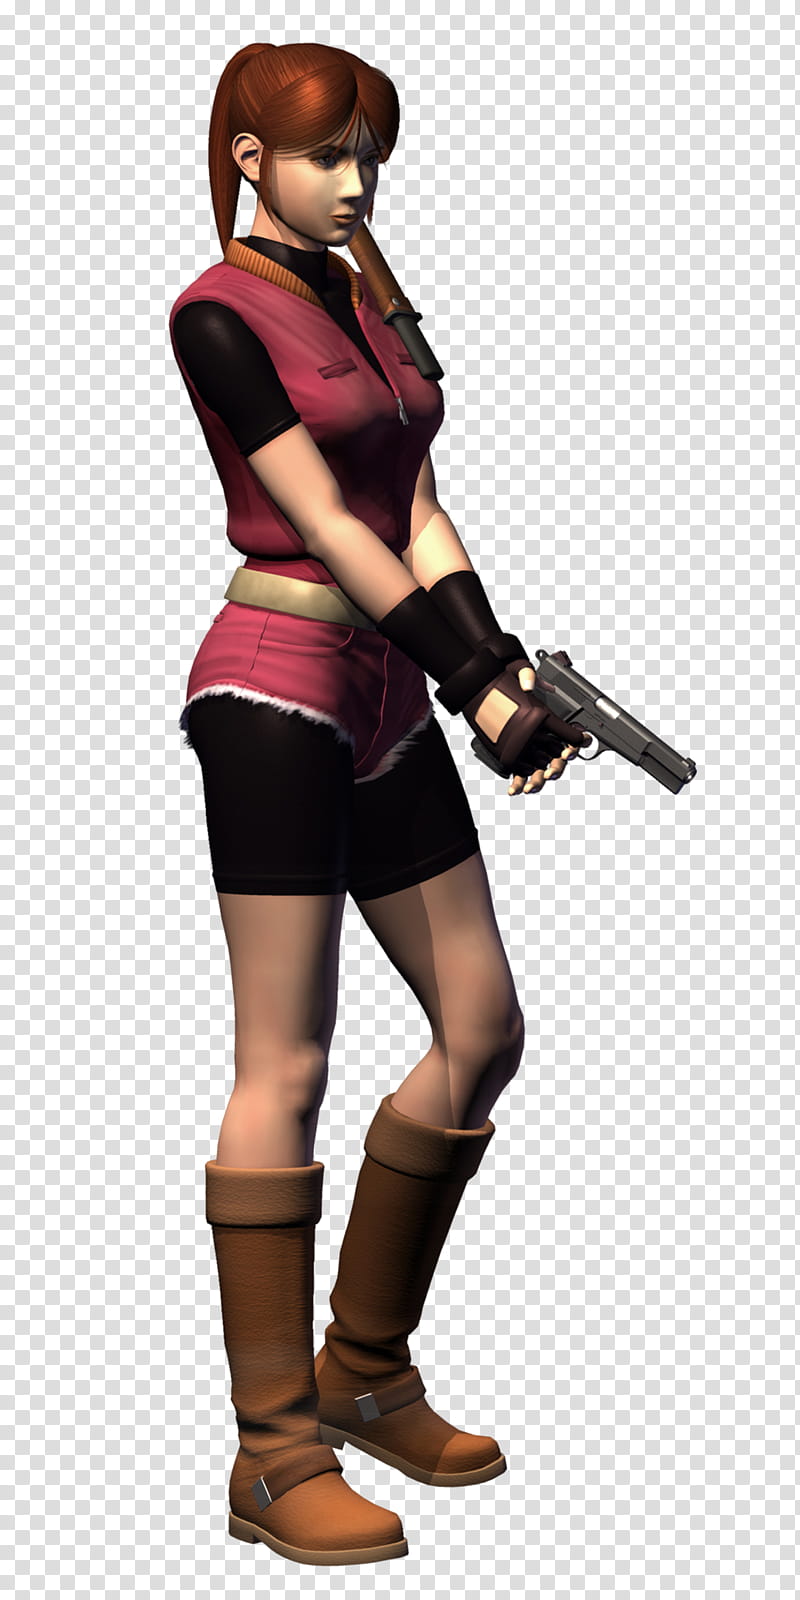 re-claire-holding-gun-render-claire-redfield-holding-pistol-transparent-background-png-clipart